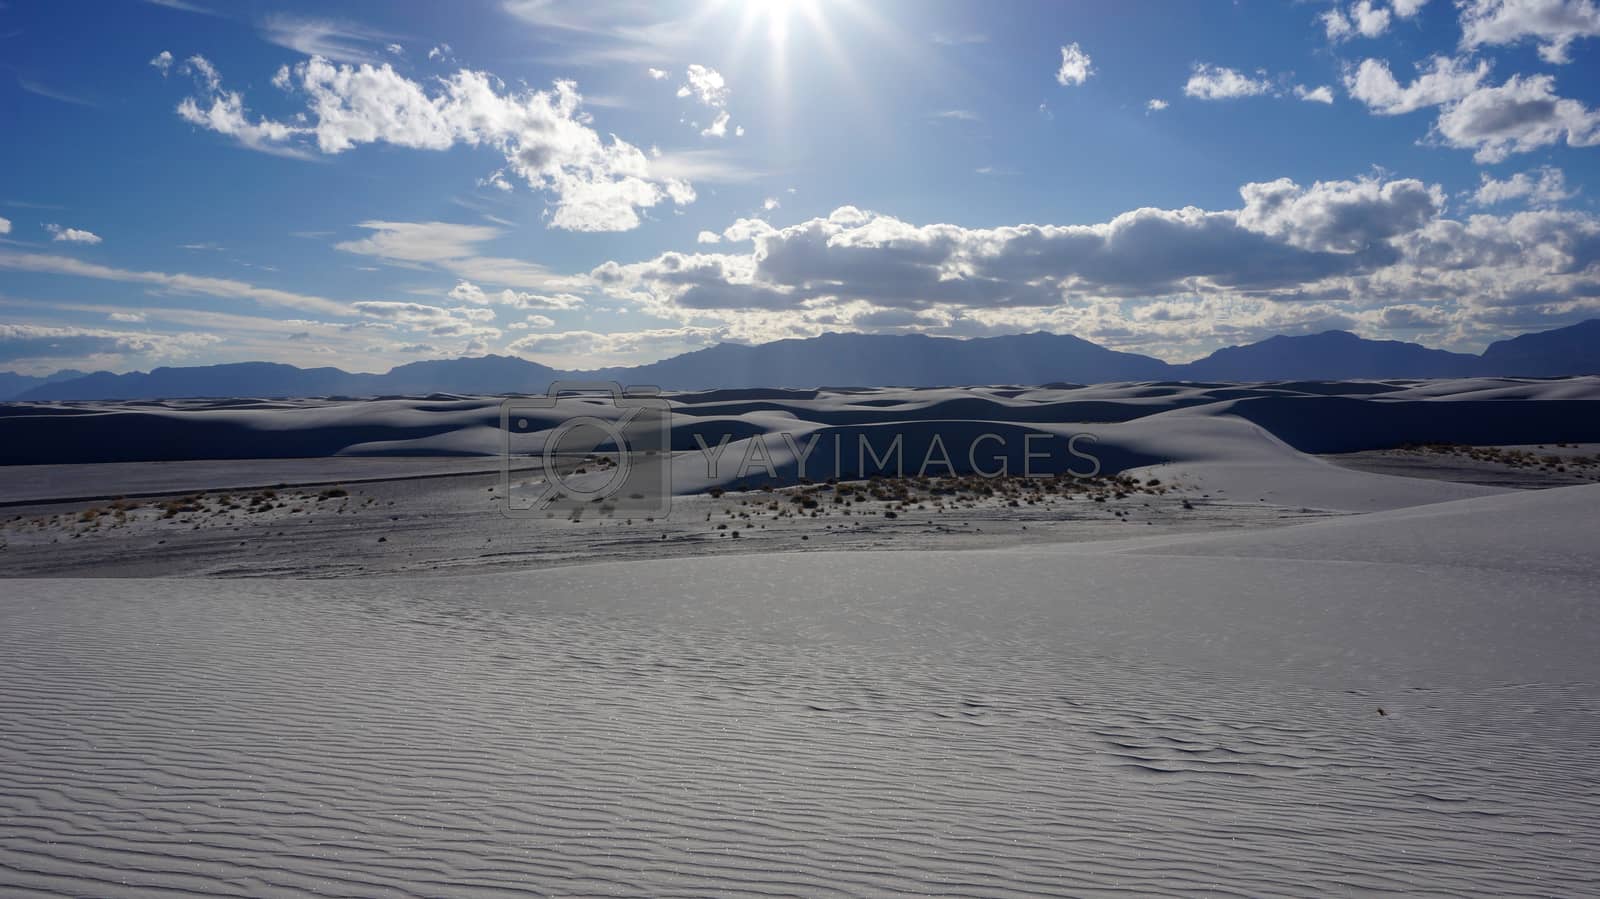 Royalty free image of White Sands, New Mexico by tang90246